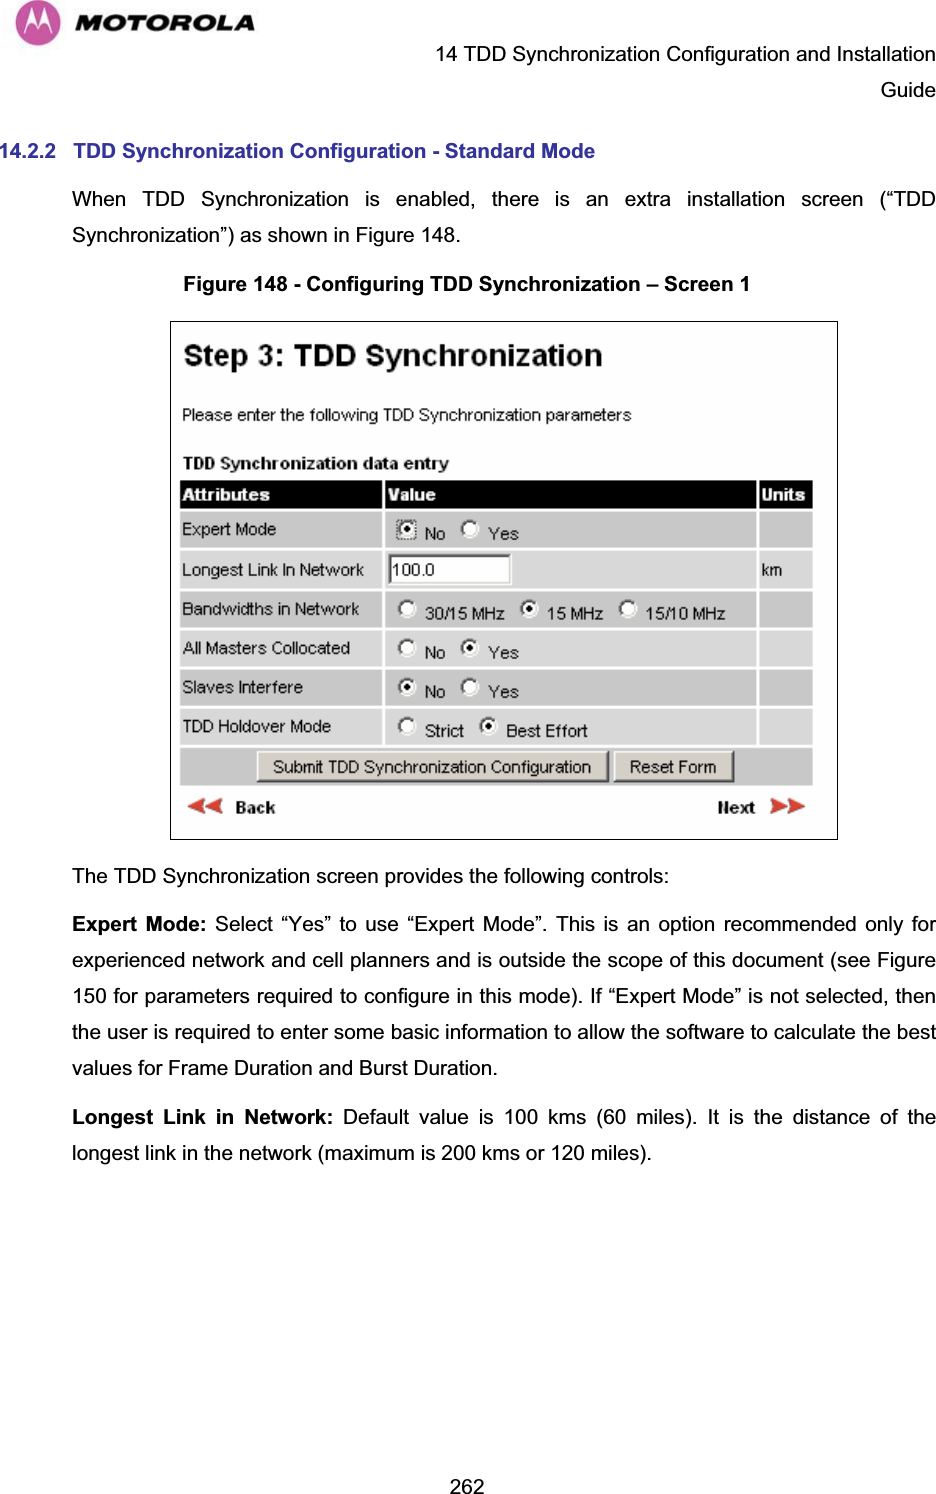   14 TDD Synchronization Configuration and Installation Guide  26214.2.2  TDD Synchronization Configuration - Standard Mode When TDD Synchronization is enabled, there is an extra installation screen (“TDD Synchronization”) as shown in Figure 148. Figure 148 - Configuring TDD Synchronization – Screen 1  The TDD Synchronization screen provides the following controls: Expert Mode: Select “Yes” to use “Expert Mode”. This is an option recommended only for experienced network and cell planners and is outside the scope of this document (see Figure 150 for parameters required to configure in this mode). If “Expert Mode” is not selected, then the user is required to enter some basic information to allow the software to calculate the best values for Frame Duration and Burst Duration. Longest Link in Network: Default value is 100 kms (60 miles). It is the distance of the longest link in the network (maximum is 200 kms or 120 miles). 